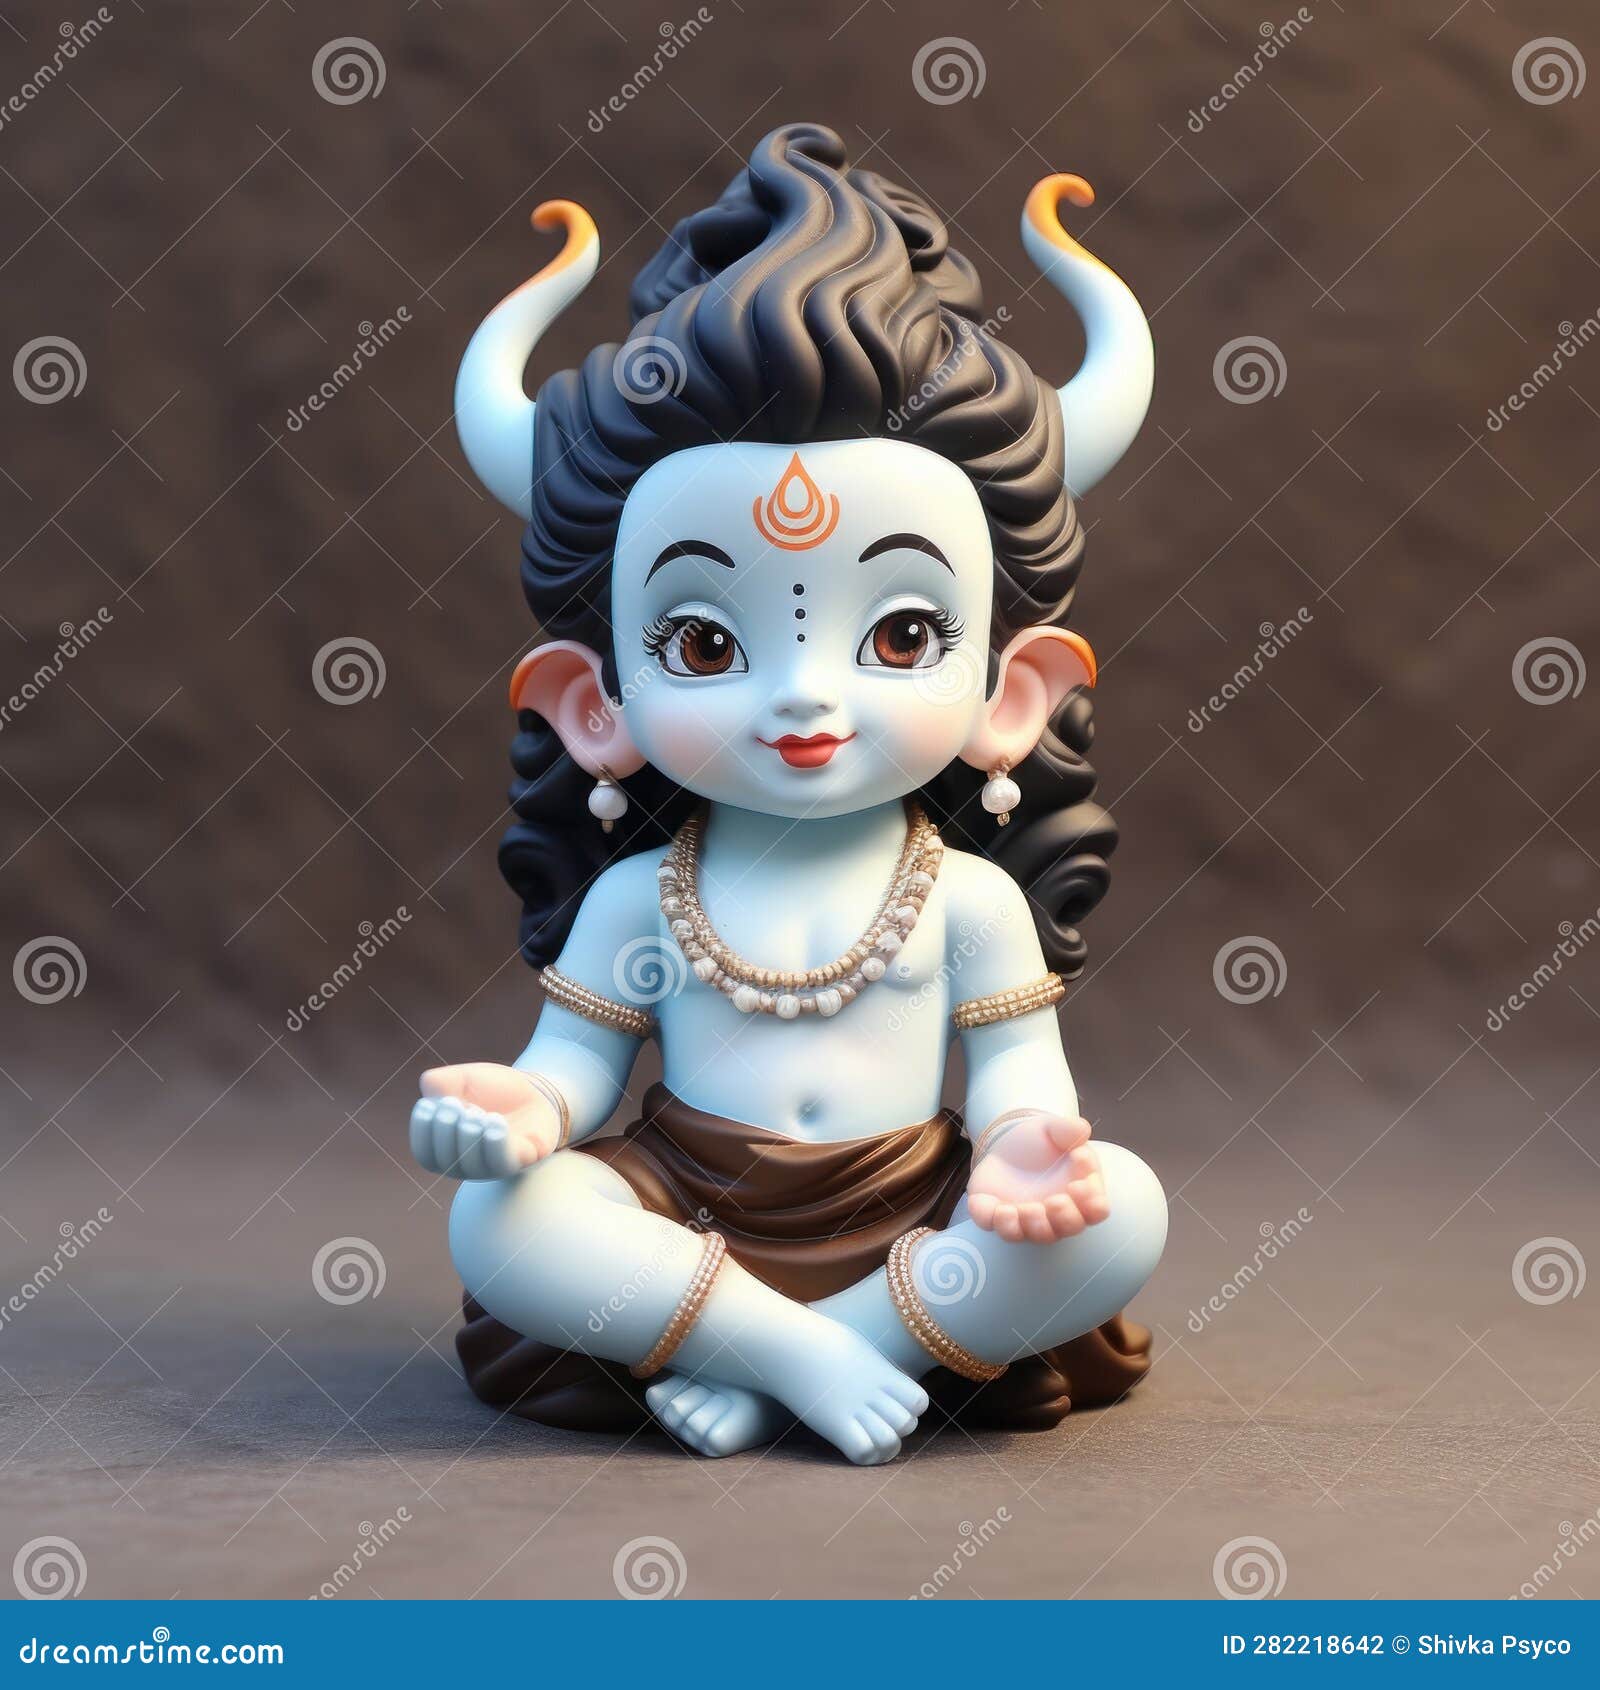 Baby Shiva Wallpaper Images and Photos Free Download